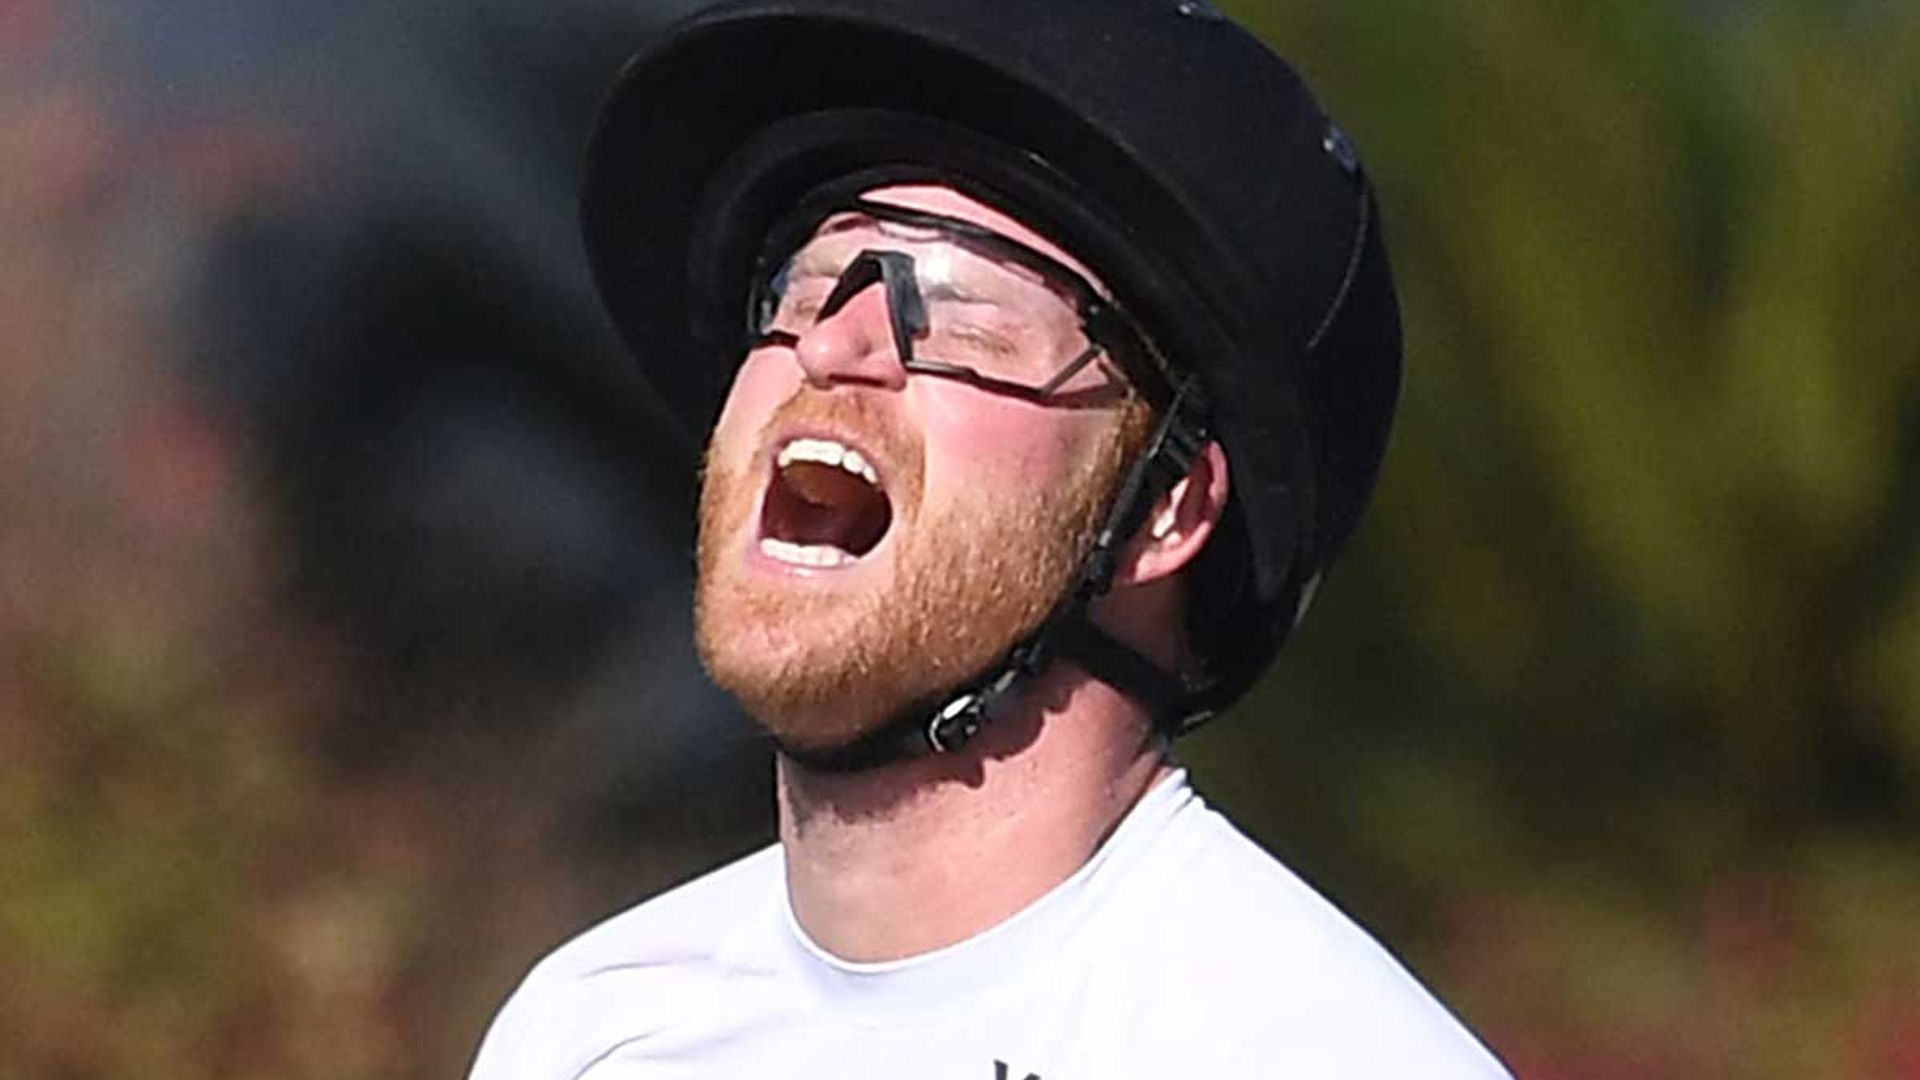 Prince Harry worries fans as he falls off his horse during polo match